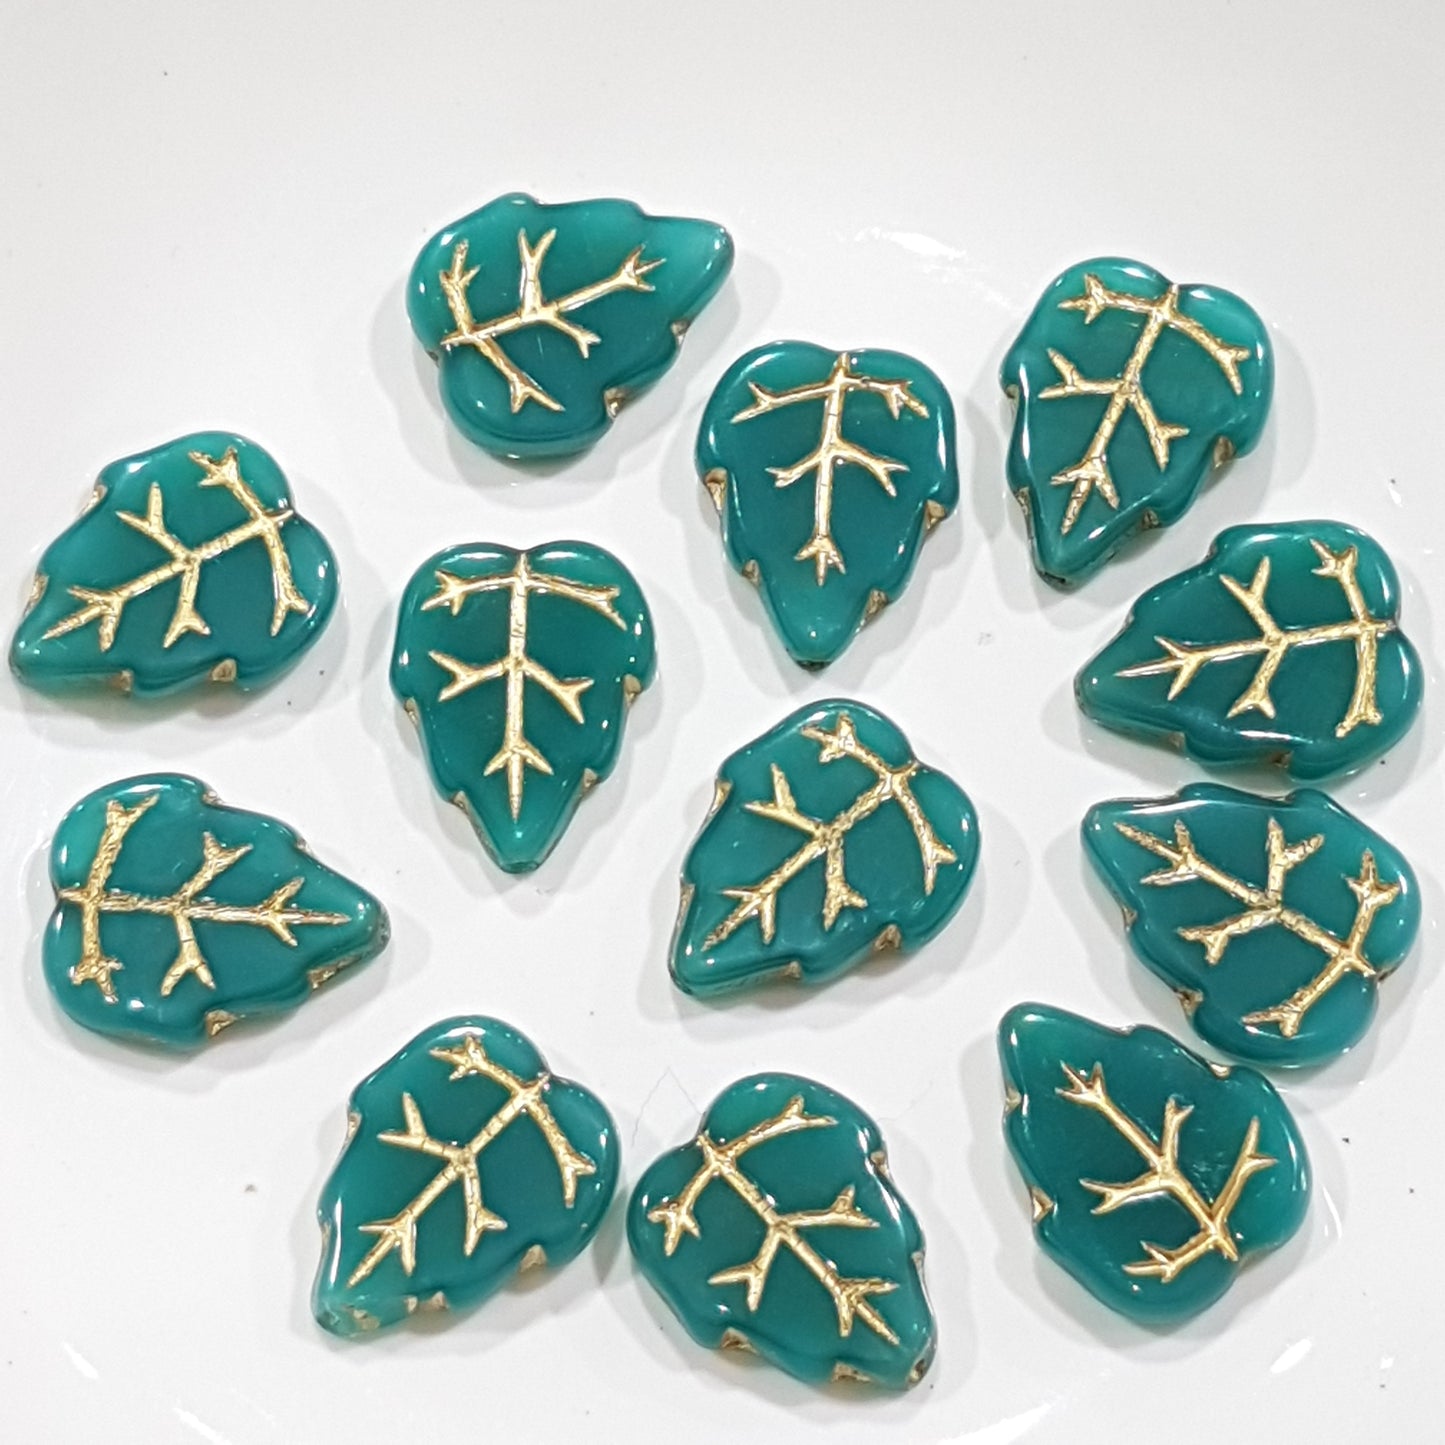 12pc Czech Milky Teal Inlaid Leaves